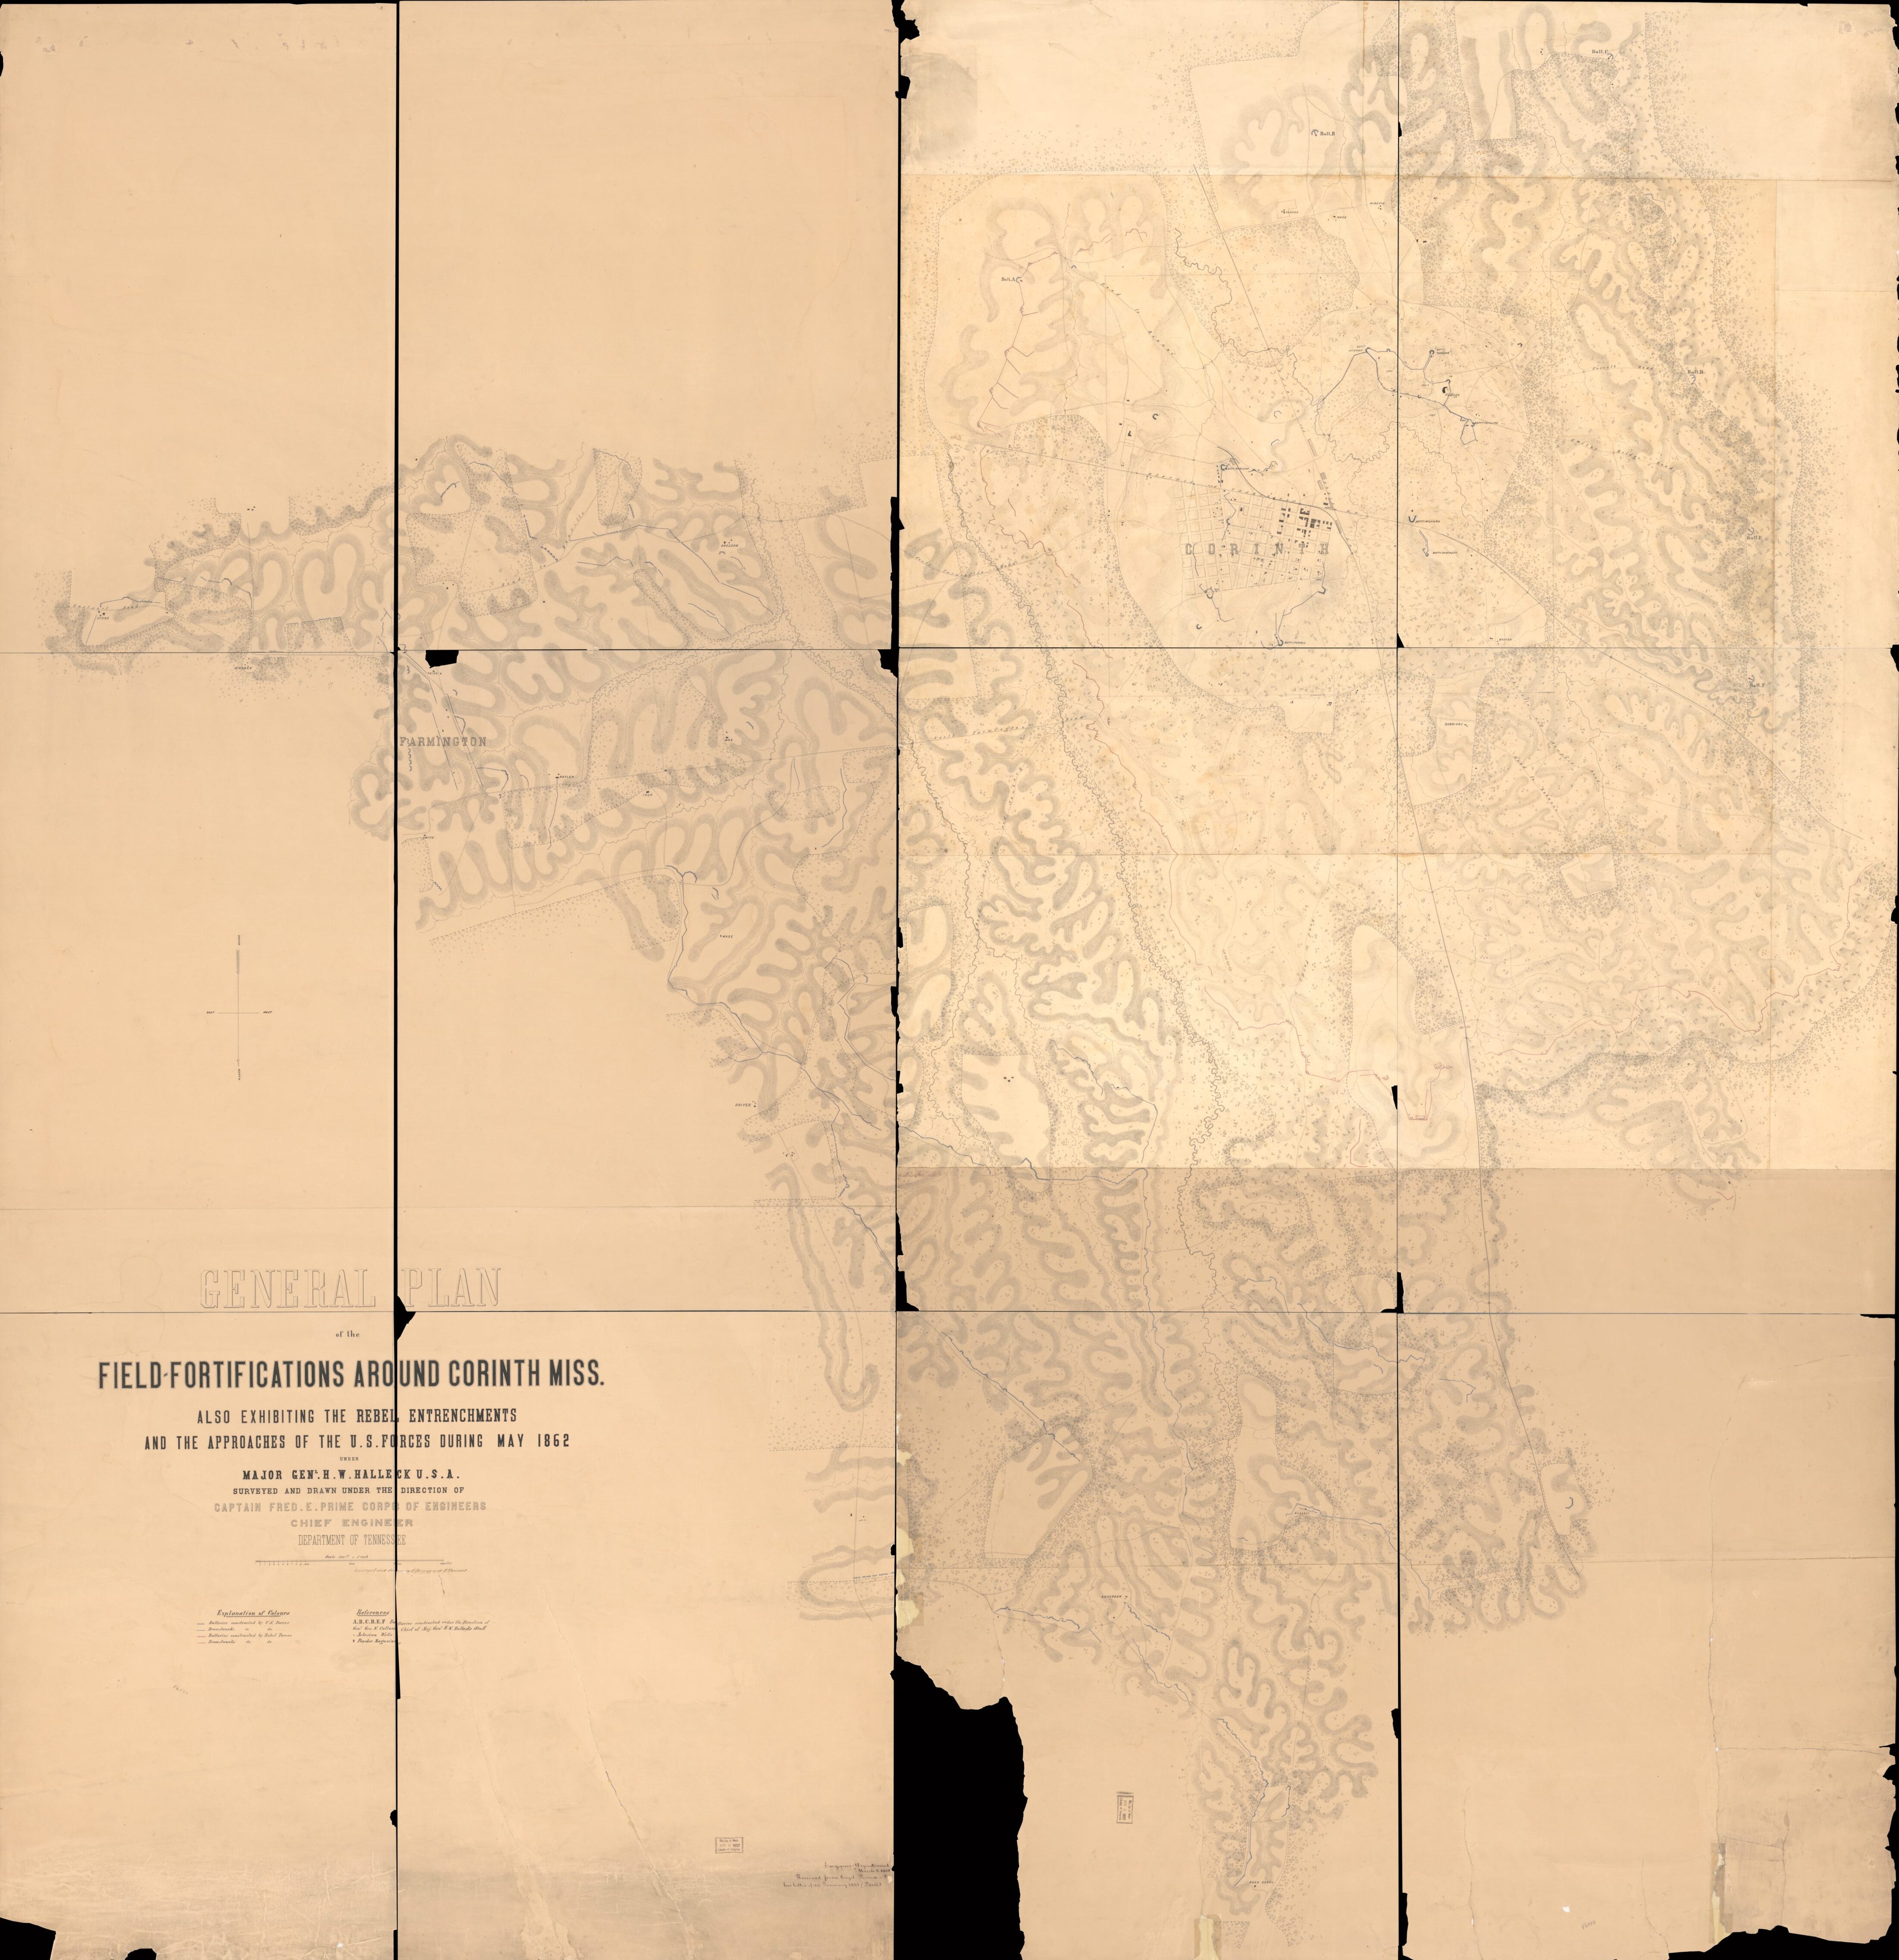 This old map of Fortifications Around Corinth, Mississippi : Also Exhibiting the Rebel Entrenchments and the Approaches of the U.S. Forces During May from 1862 Under Major Genl. H. W. Halleck, U.S.A was created by Fred. E. Prime, F. Shraag, F. Theinert i